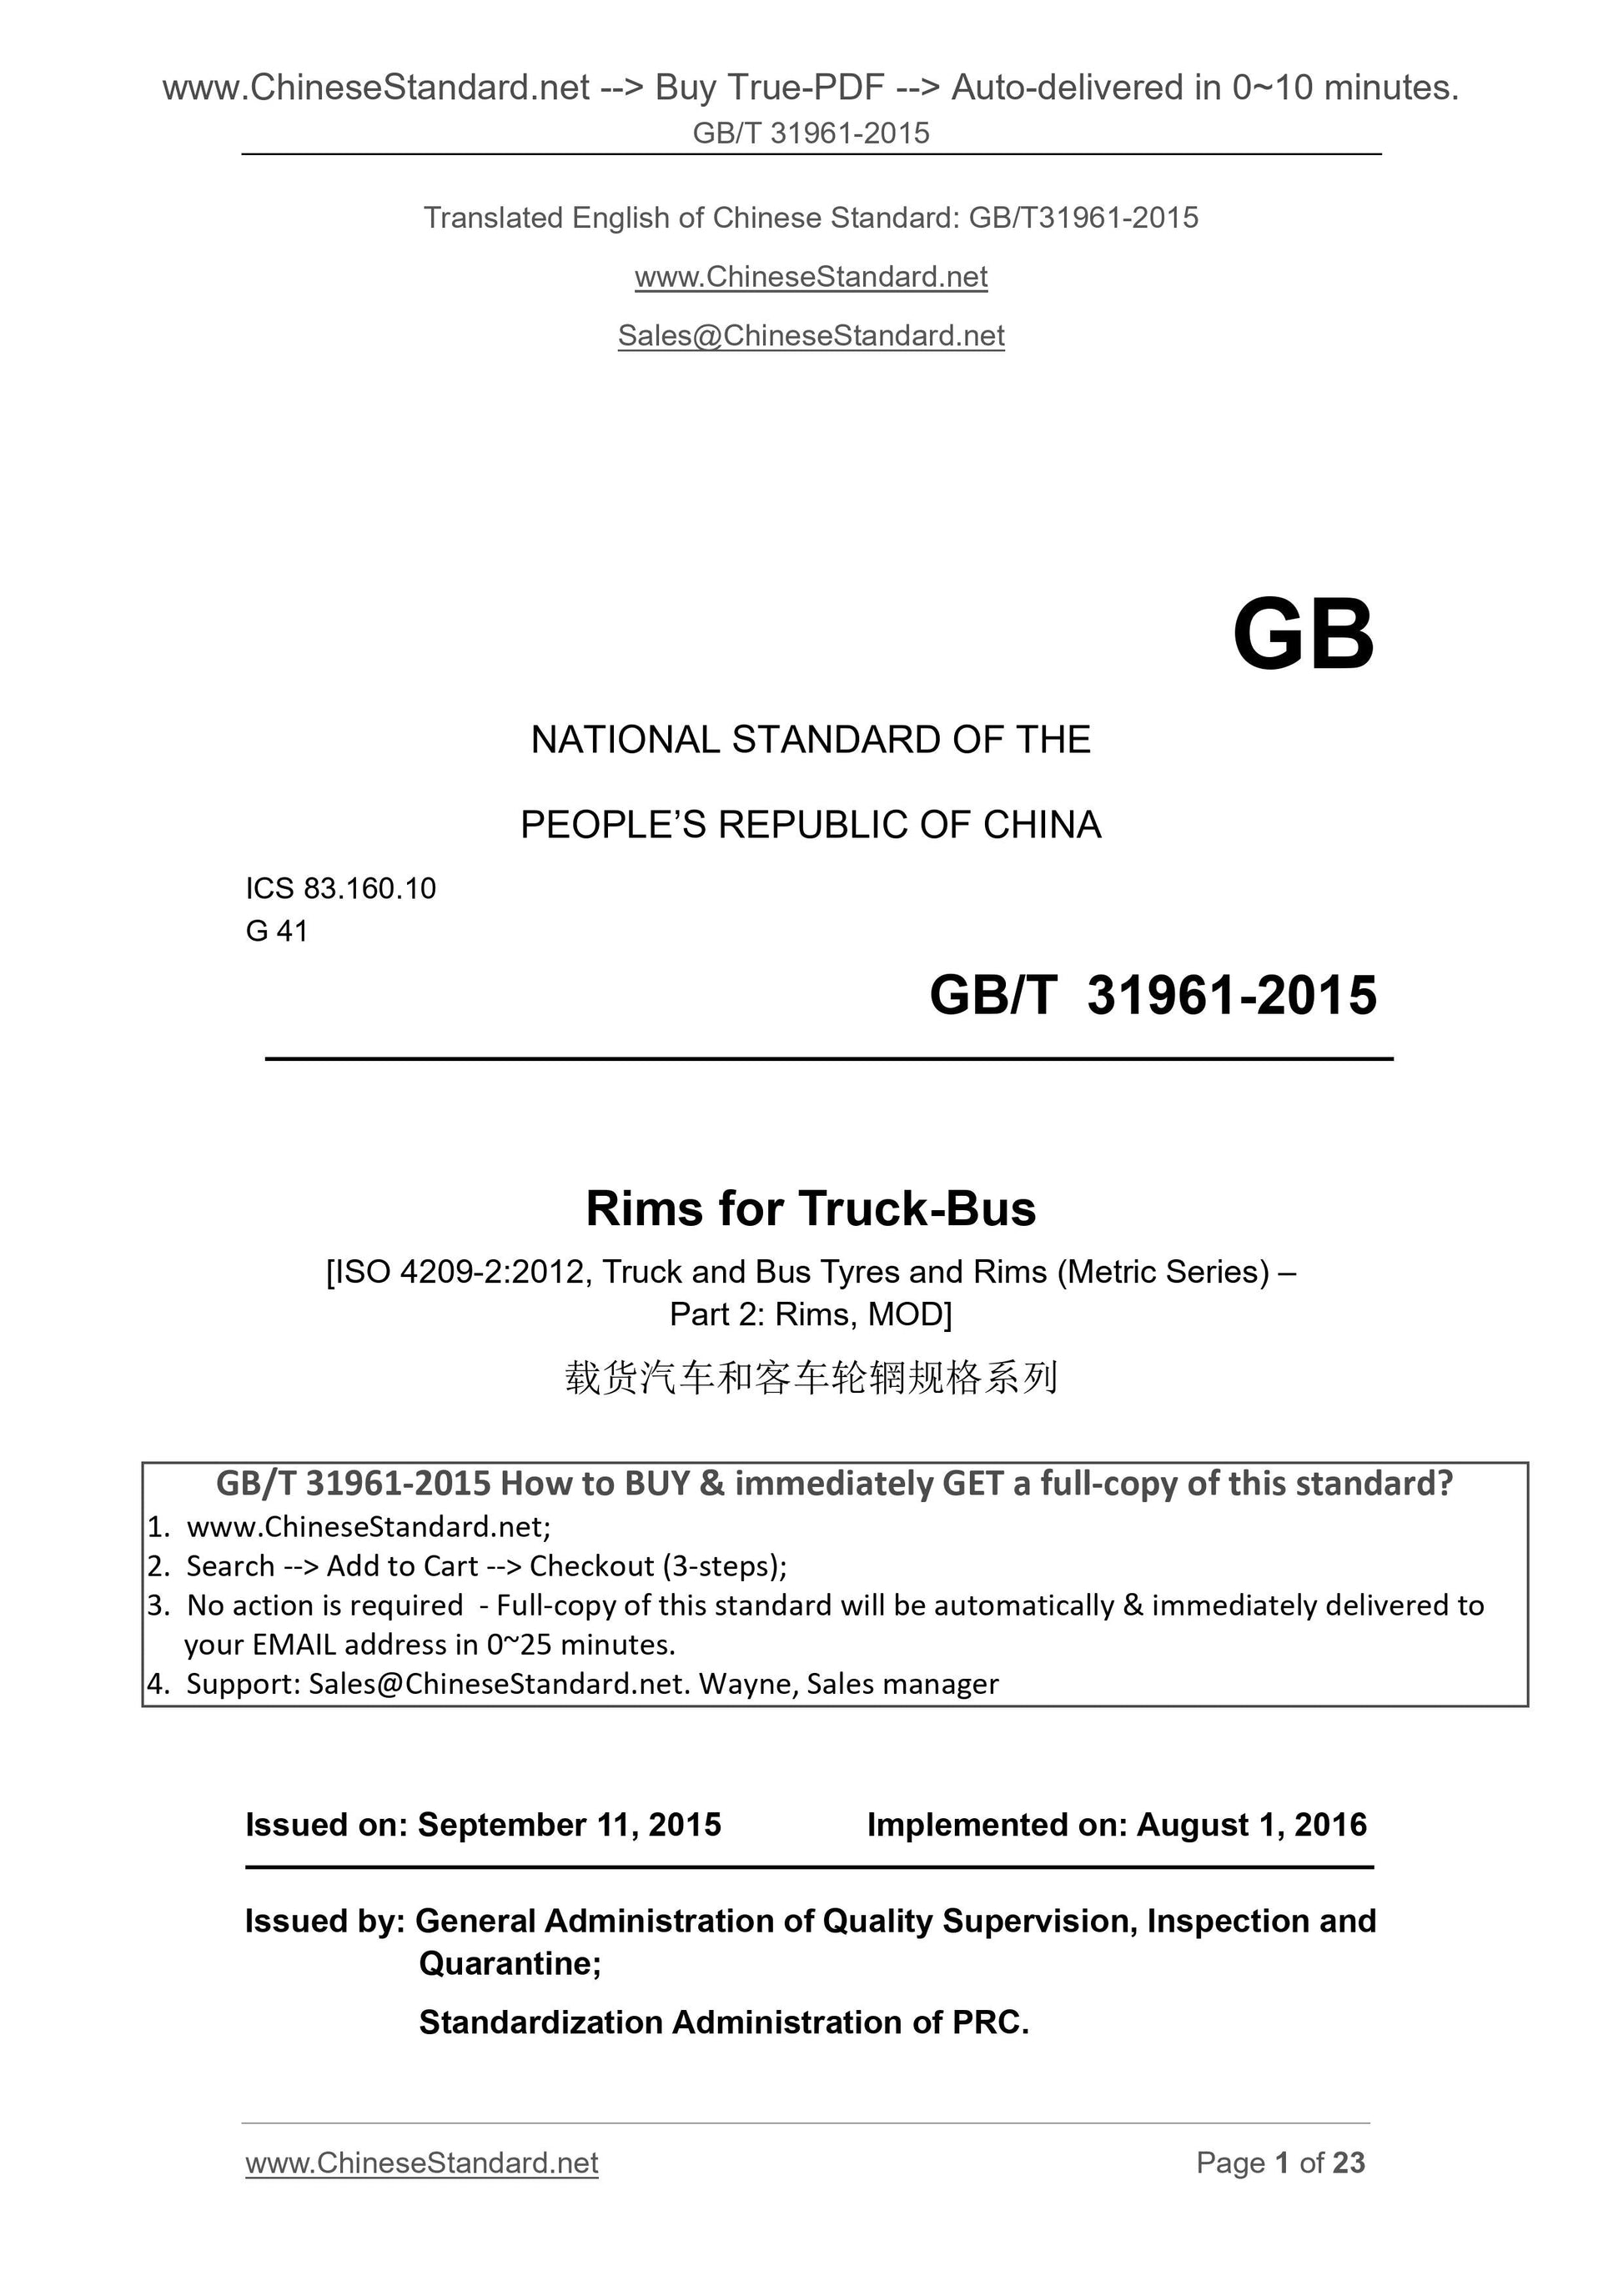 GB/T 31961-2015 Page 1